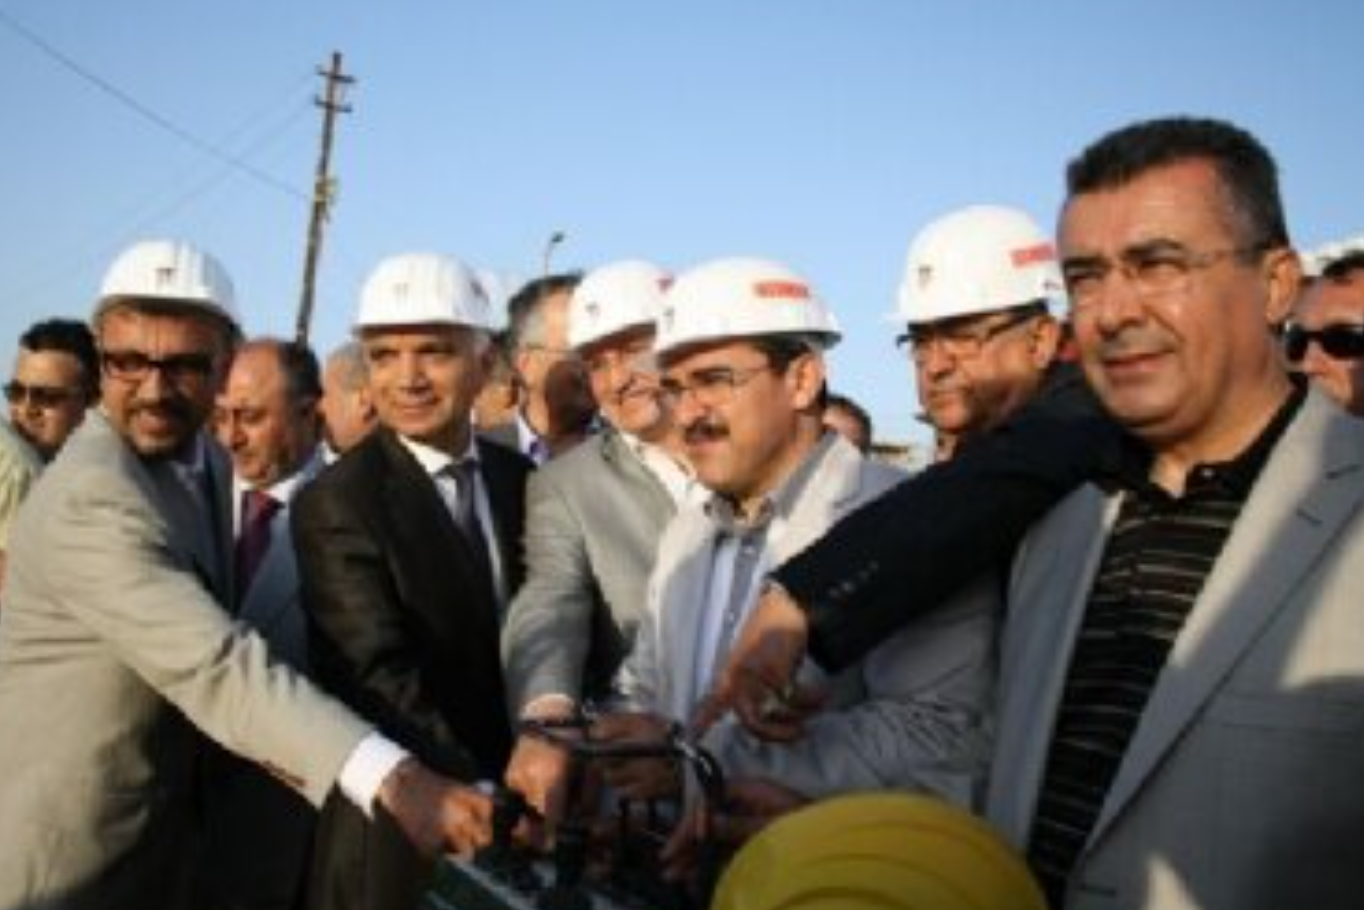 Group of people standing together, some wearing hard hats.